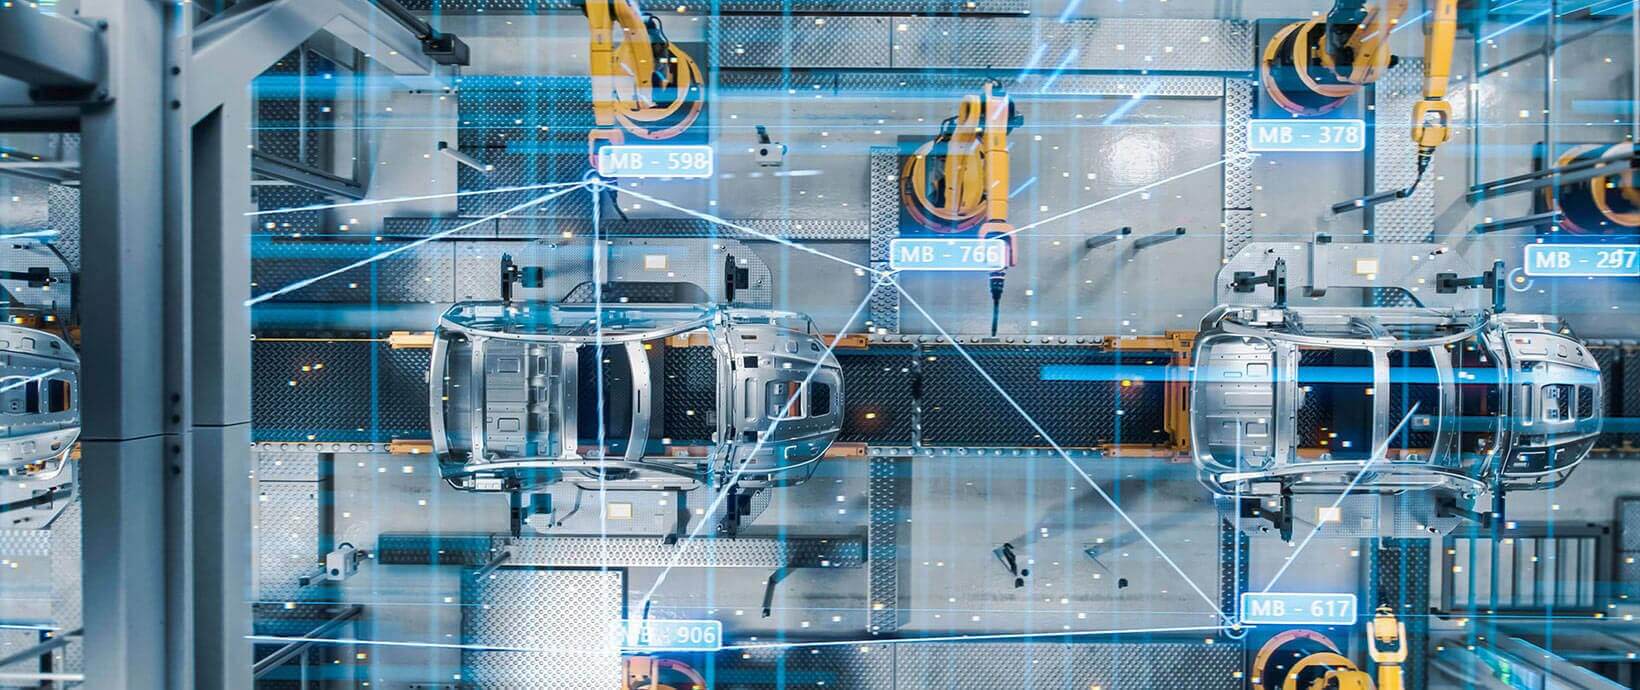 Examining the Data on Digital Twin in the Automotive Industry